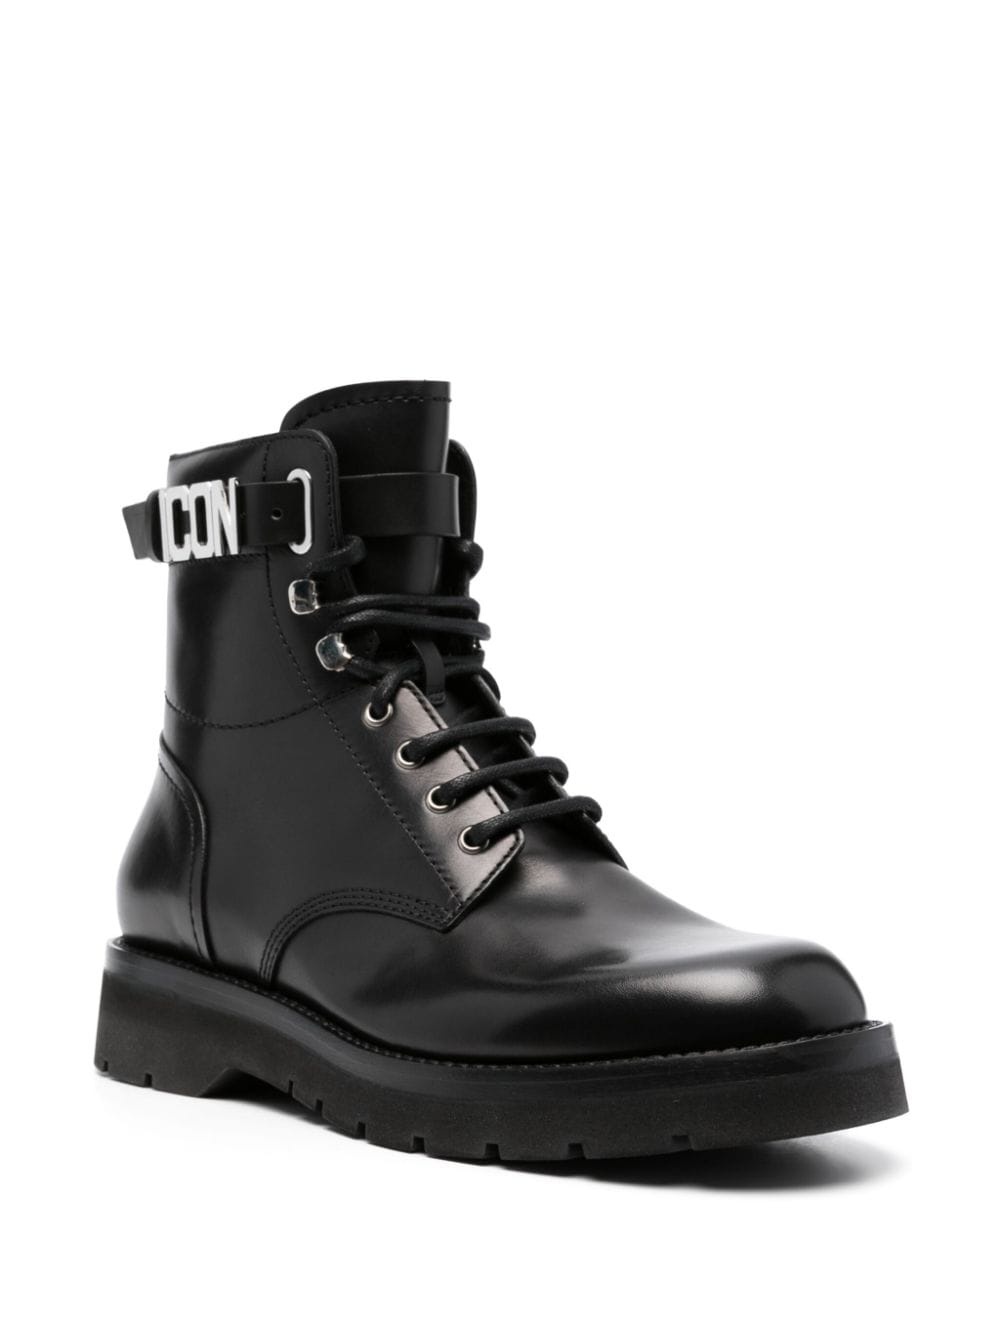 Icon leather combat boots - 2